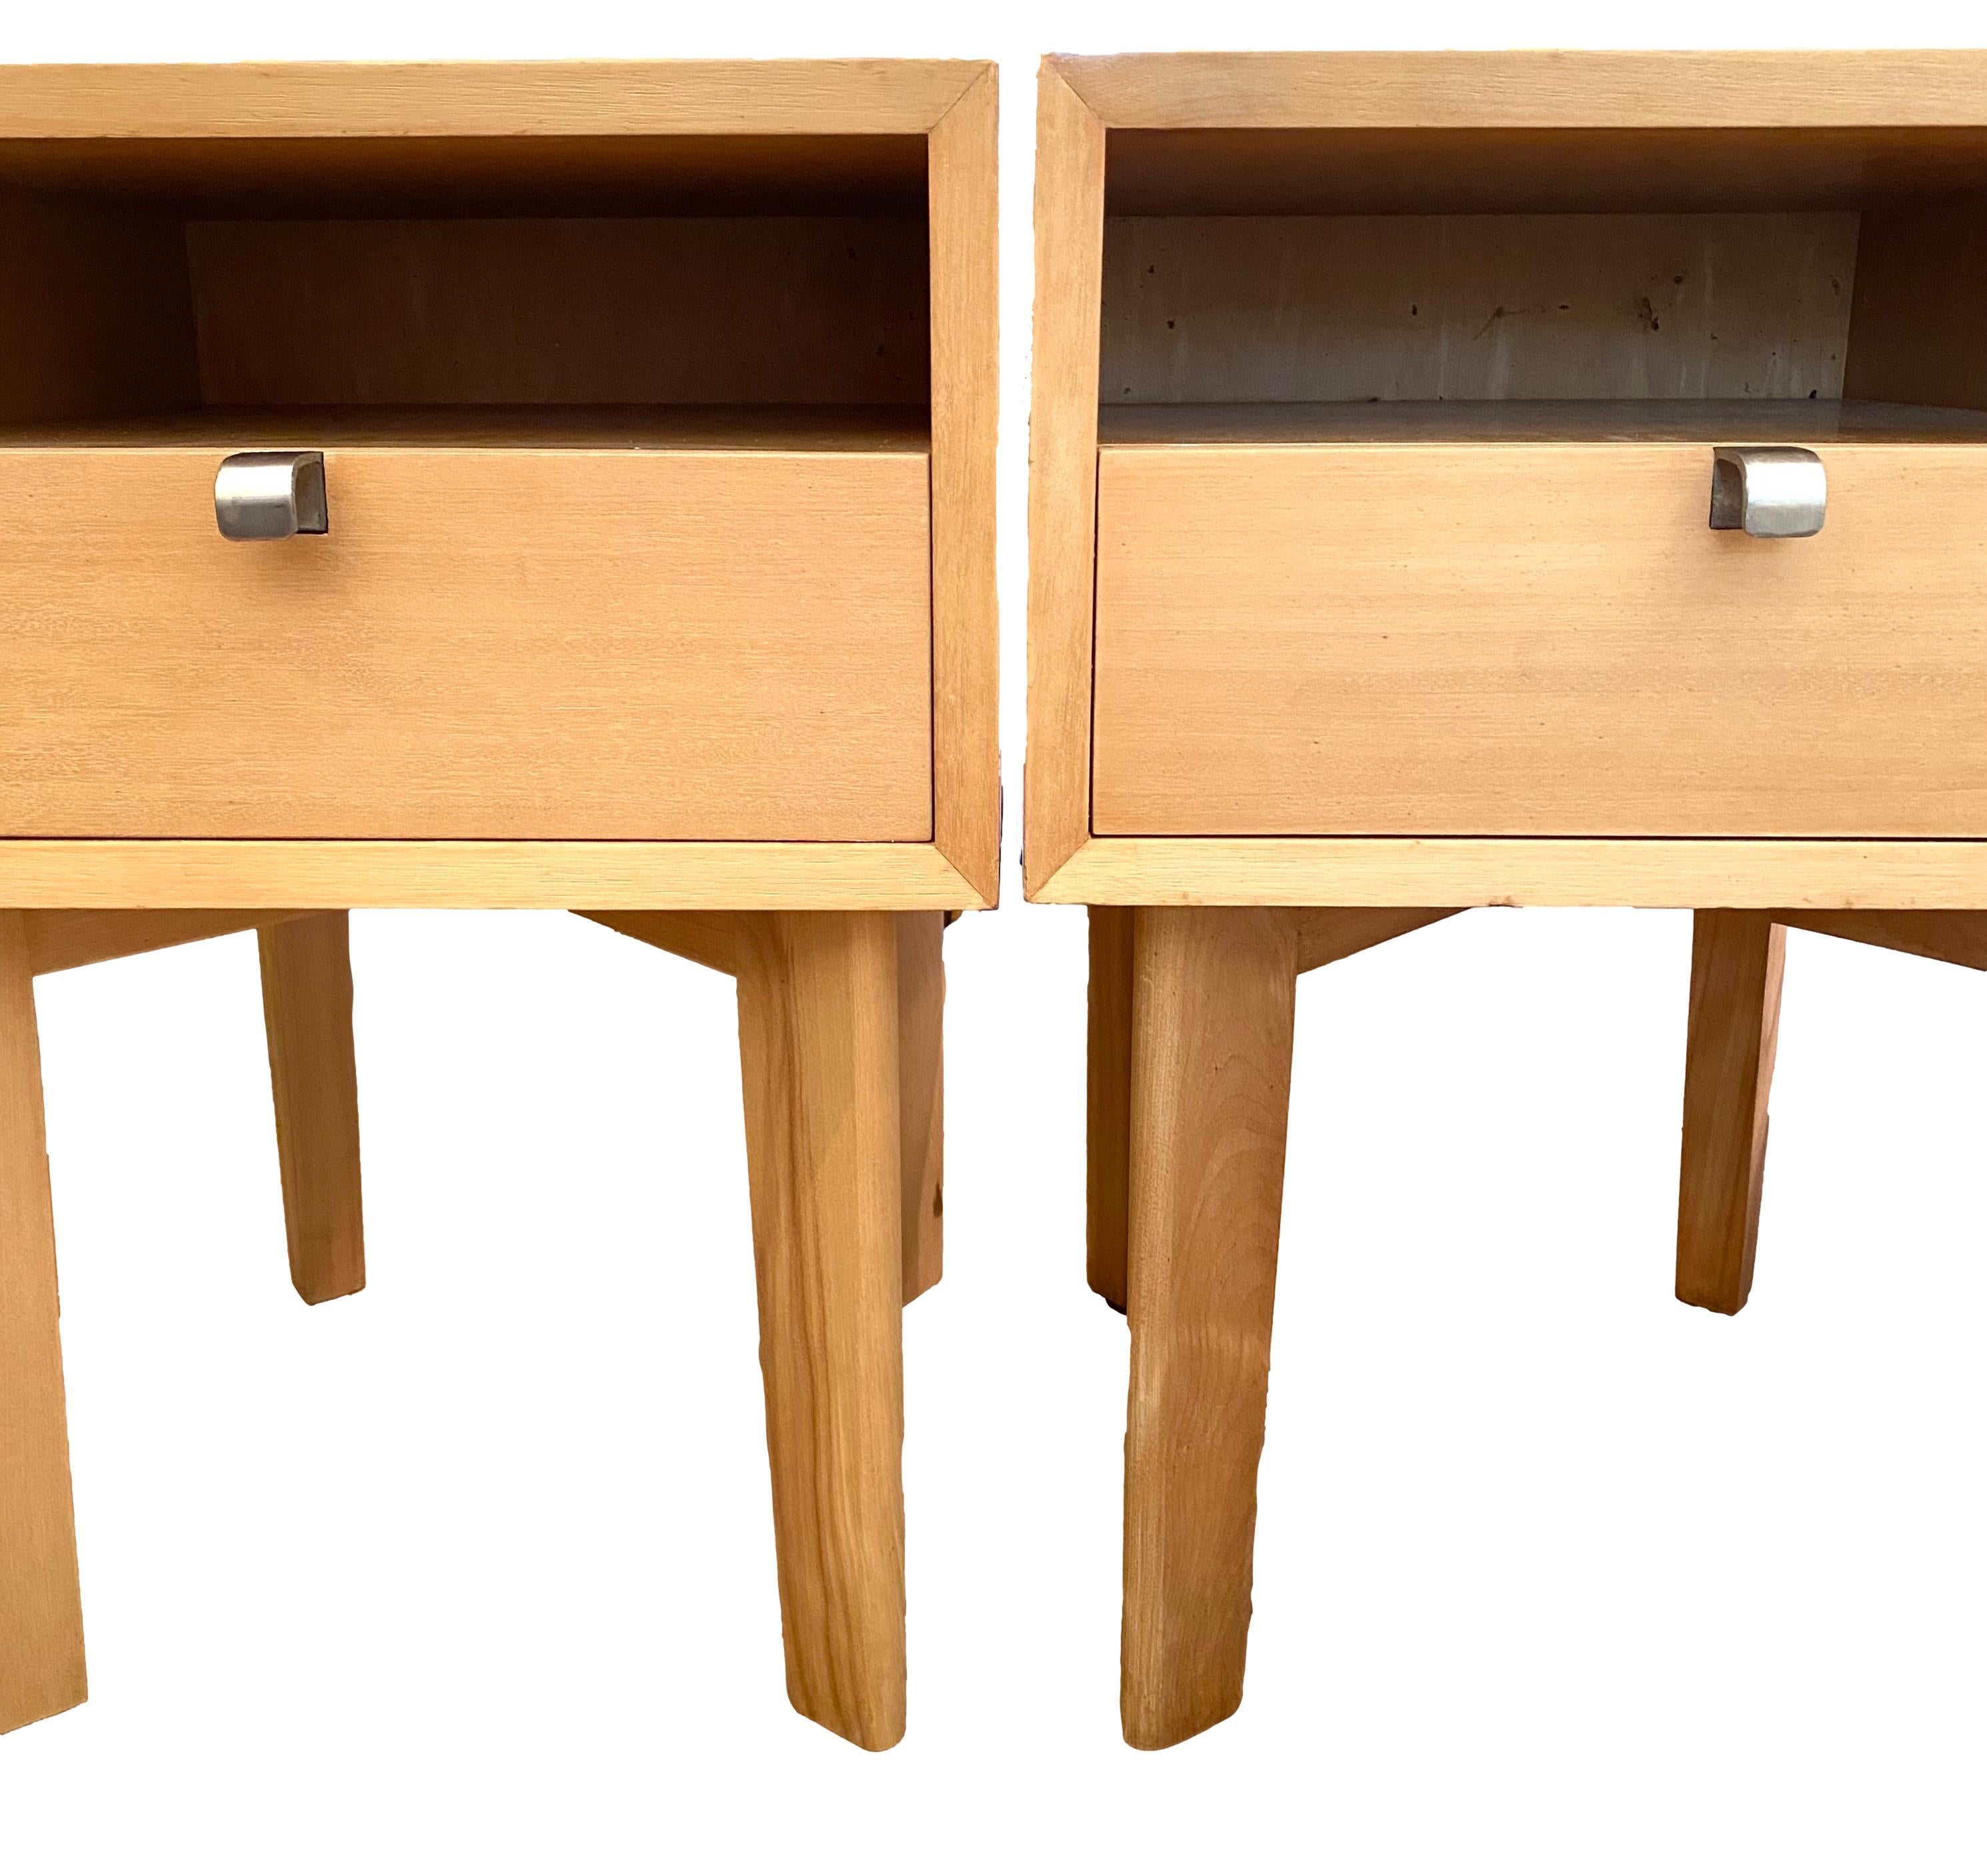 Pair of George Nelson mid-century modern end tables for Herman Miller in a recent matte finish.....